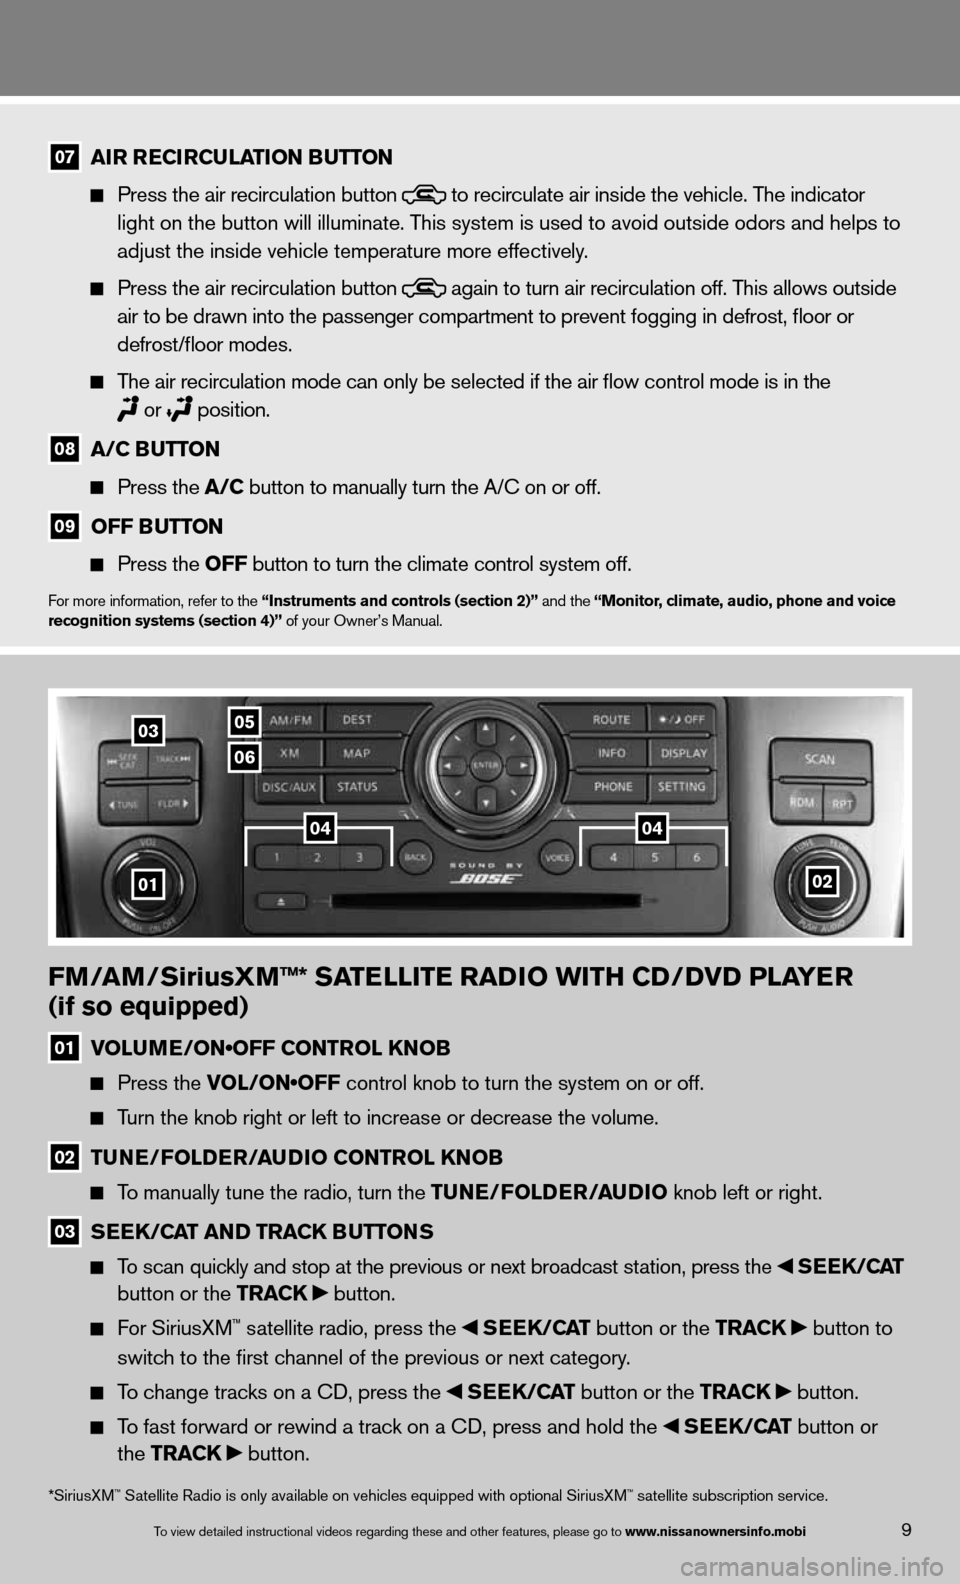 NISSAN ARMADA 2013 1.G Quick Reference Guide fm/am /siriusX m™* satE llitE raD io With CD/DvD PlayE r 
(if so equipped)
01  VOLUME/ON•OFF CONTROL KNOB
    Press the VOL/ON•OFF control knob to turn the system on or off.   
  
  Turn the kno